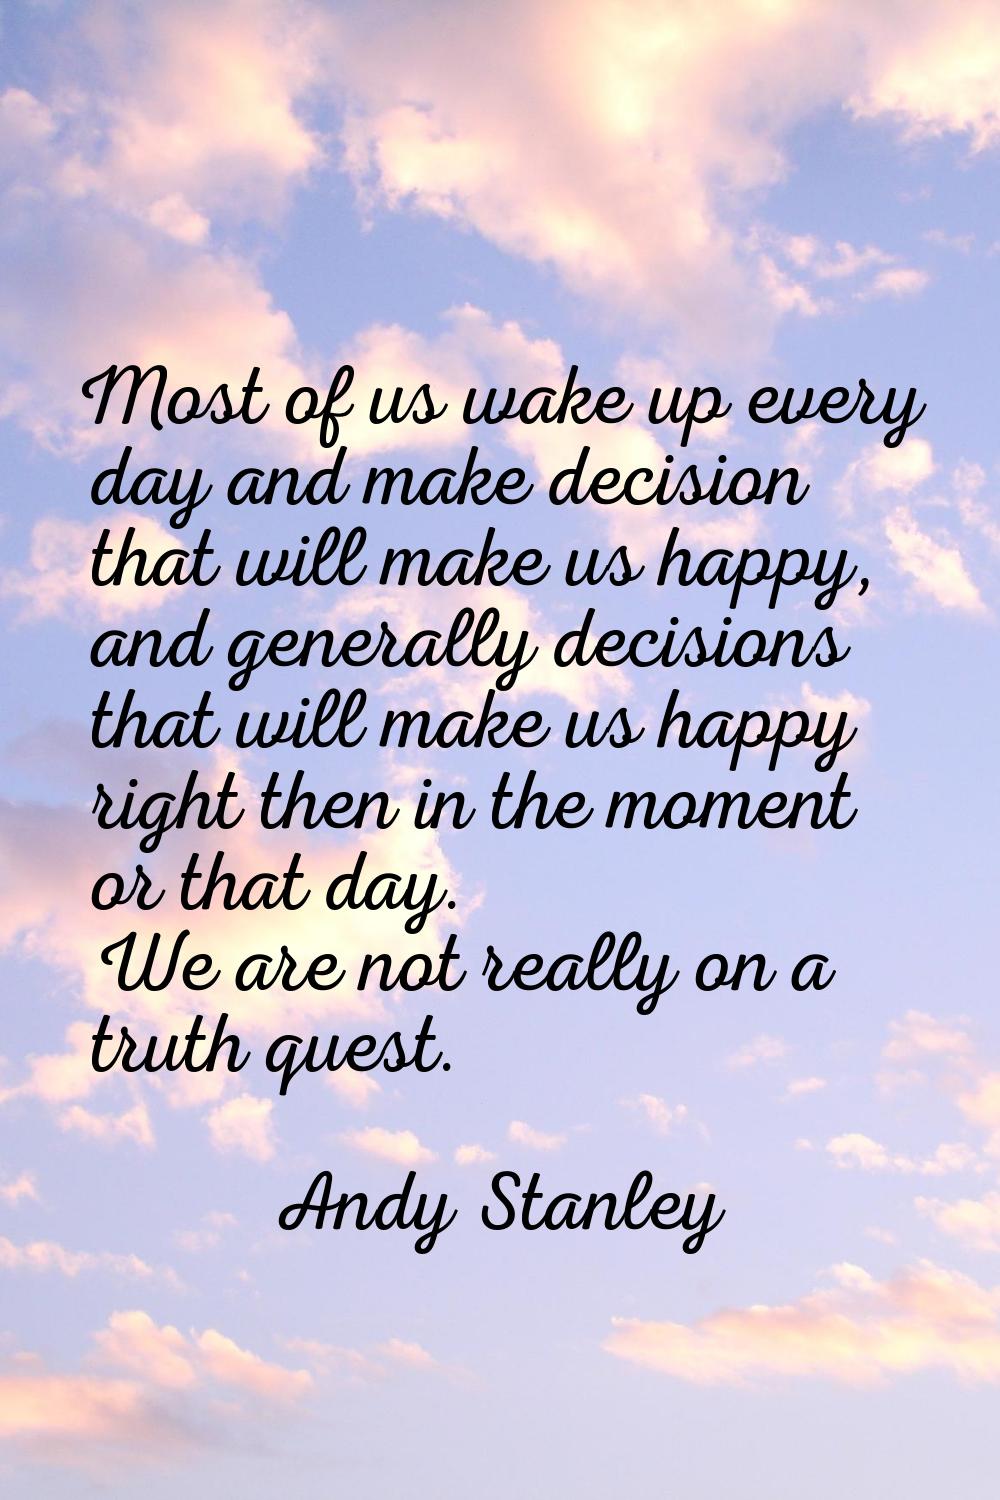 Most of us wake up every day and make decision that will make us happy, and generally decisions tha